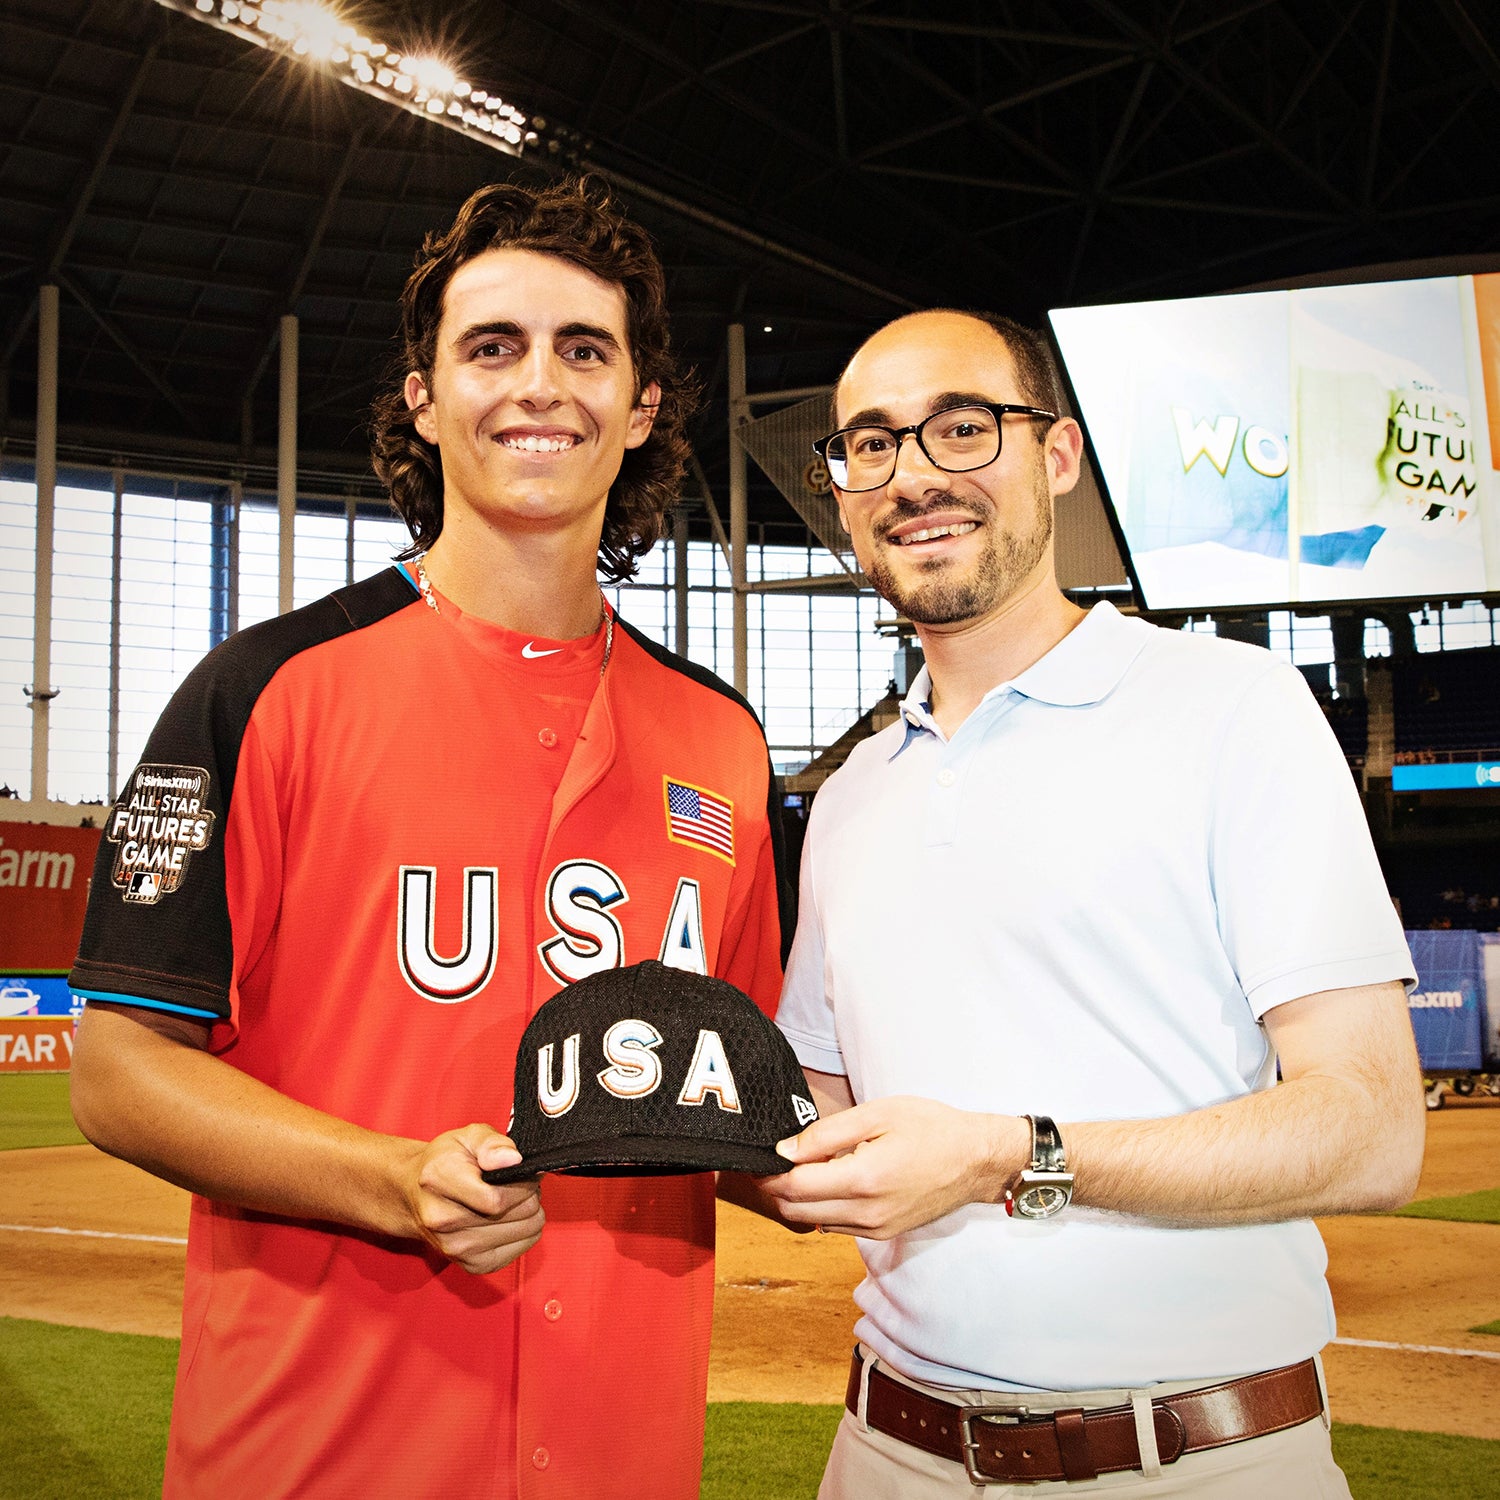 Rays’ prospect Honeywell earns All-Star Future’s Game MVP, sends cap to the Hall of Fame